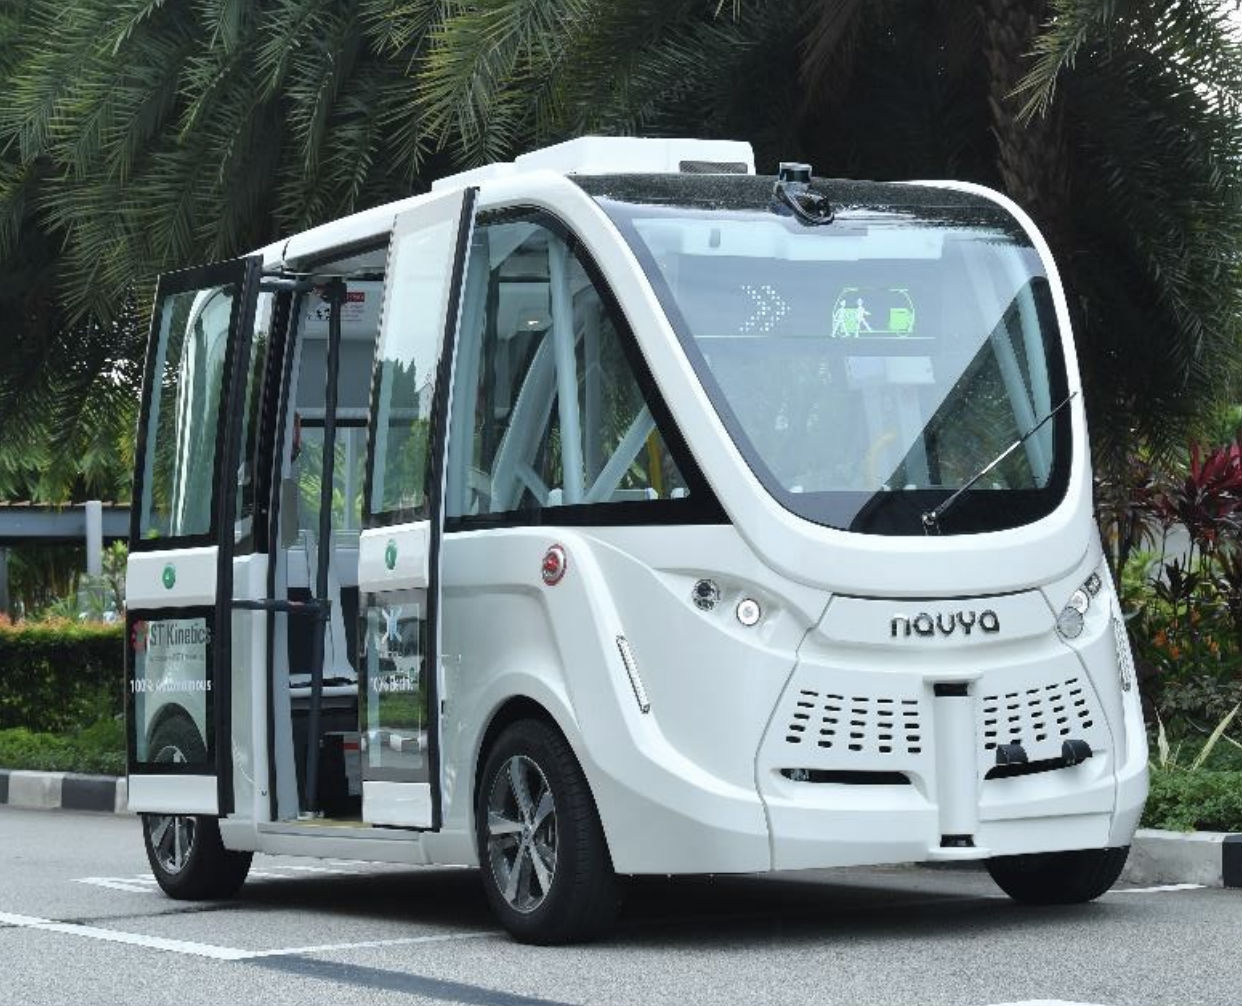 Views of the self-driving shuttle. (Photo: Sentosa)